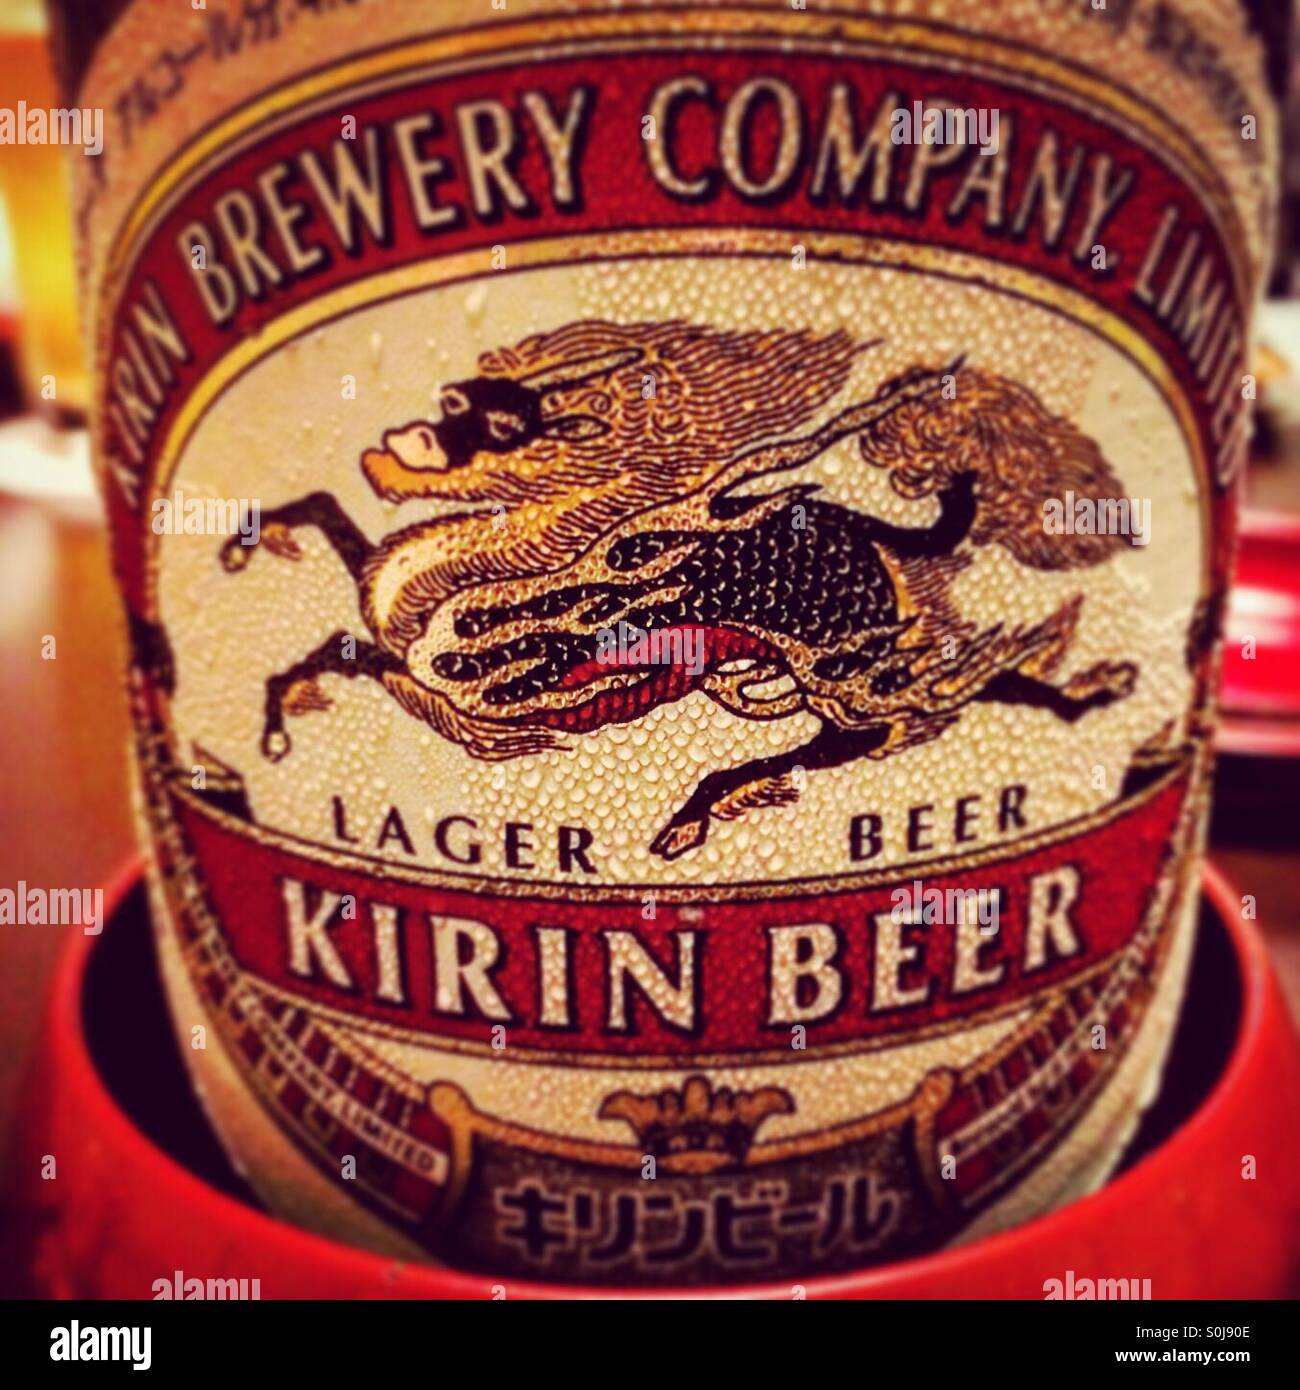 Kirin beer bottle label covered in fine water droplets Stock Photo